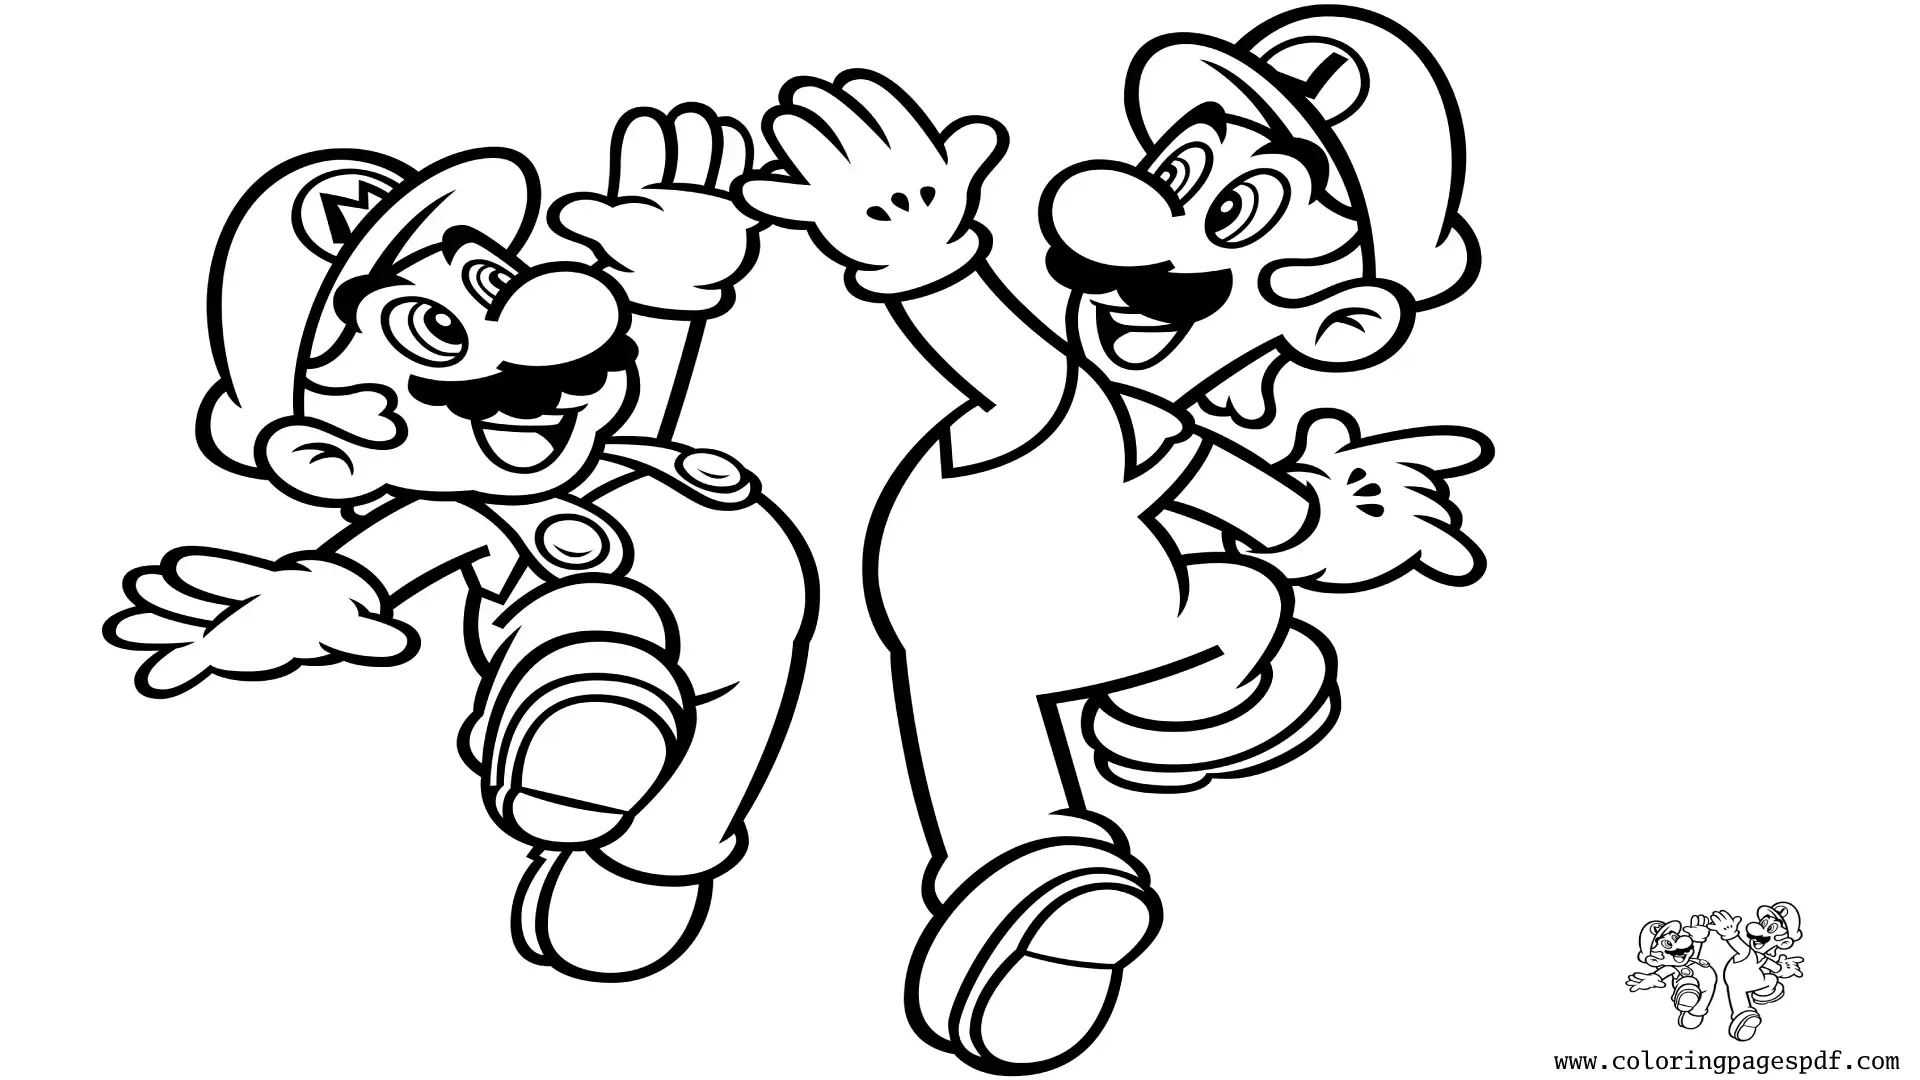 Coloring Page Of Mario And Luigi High-five